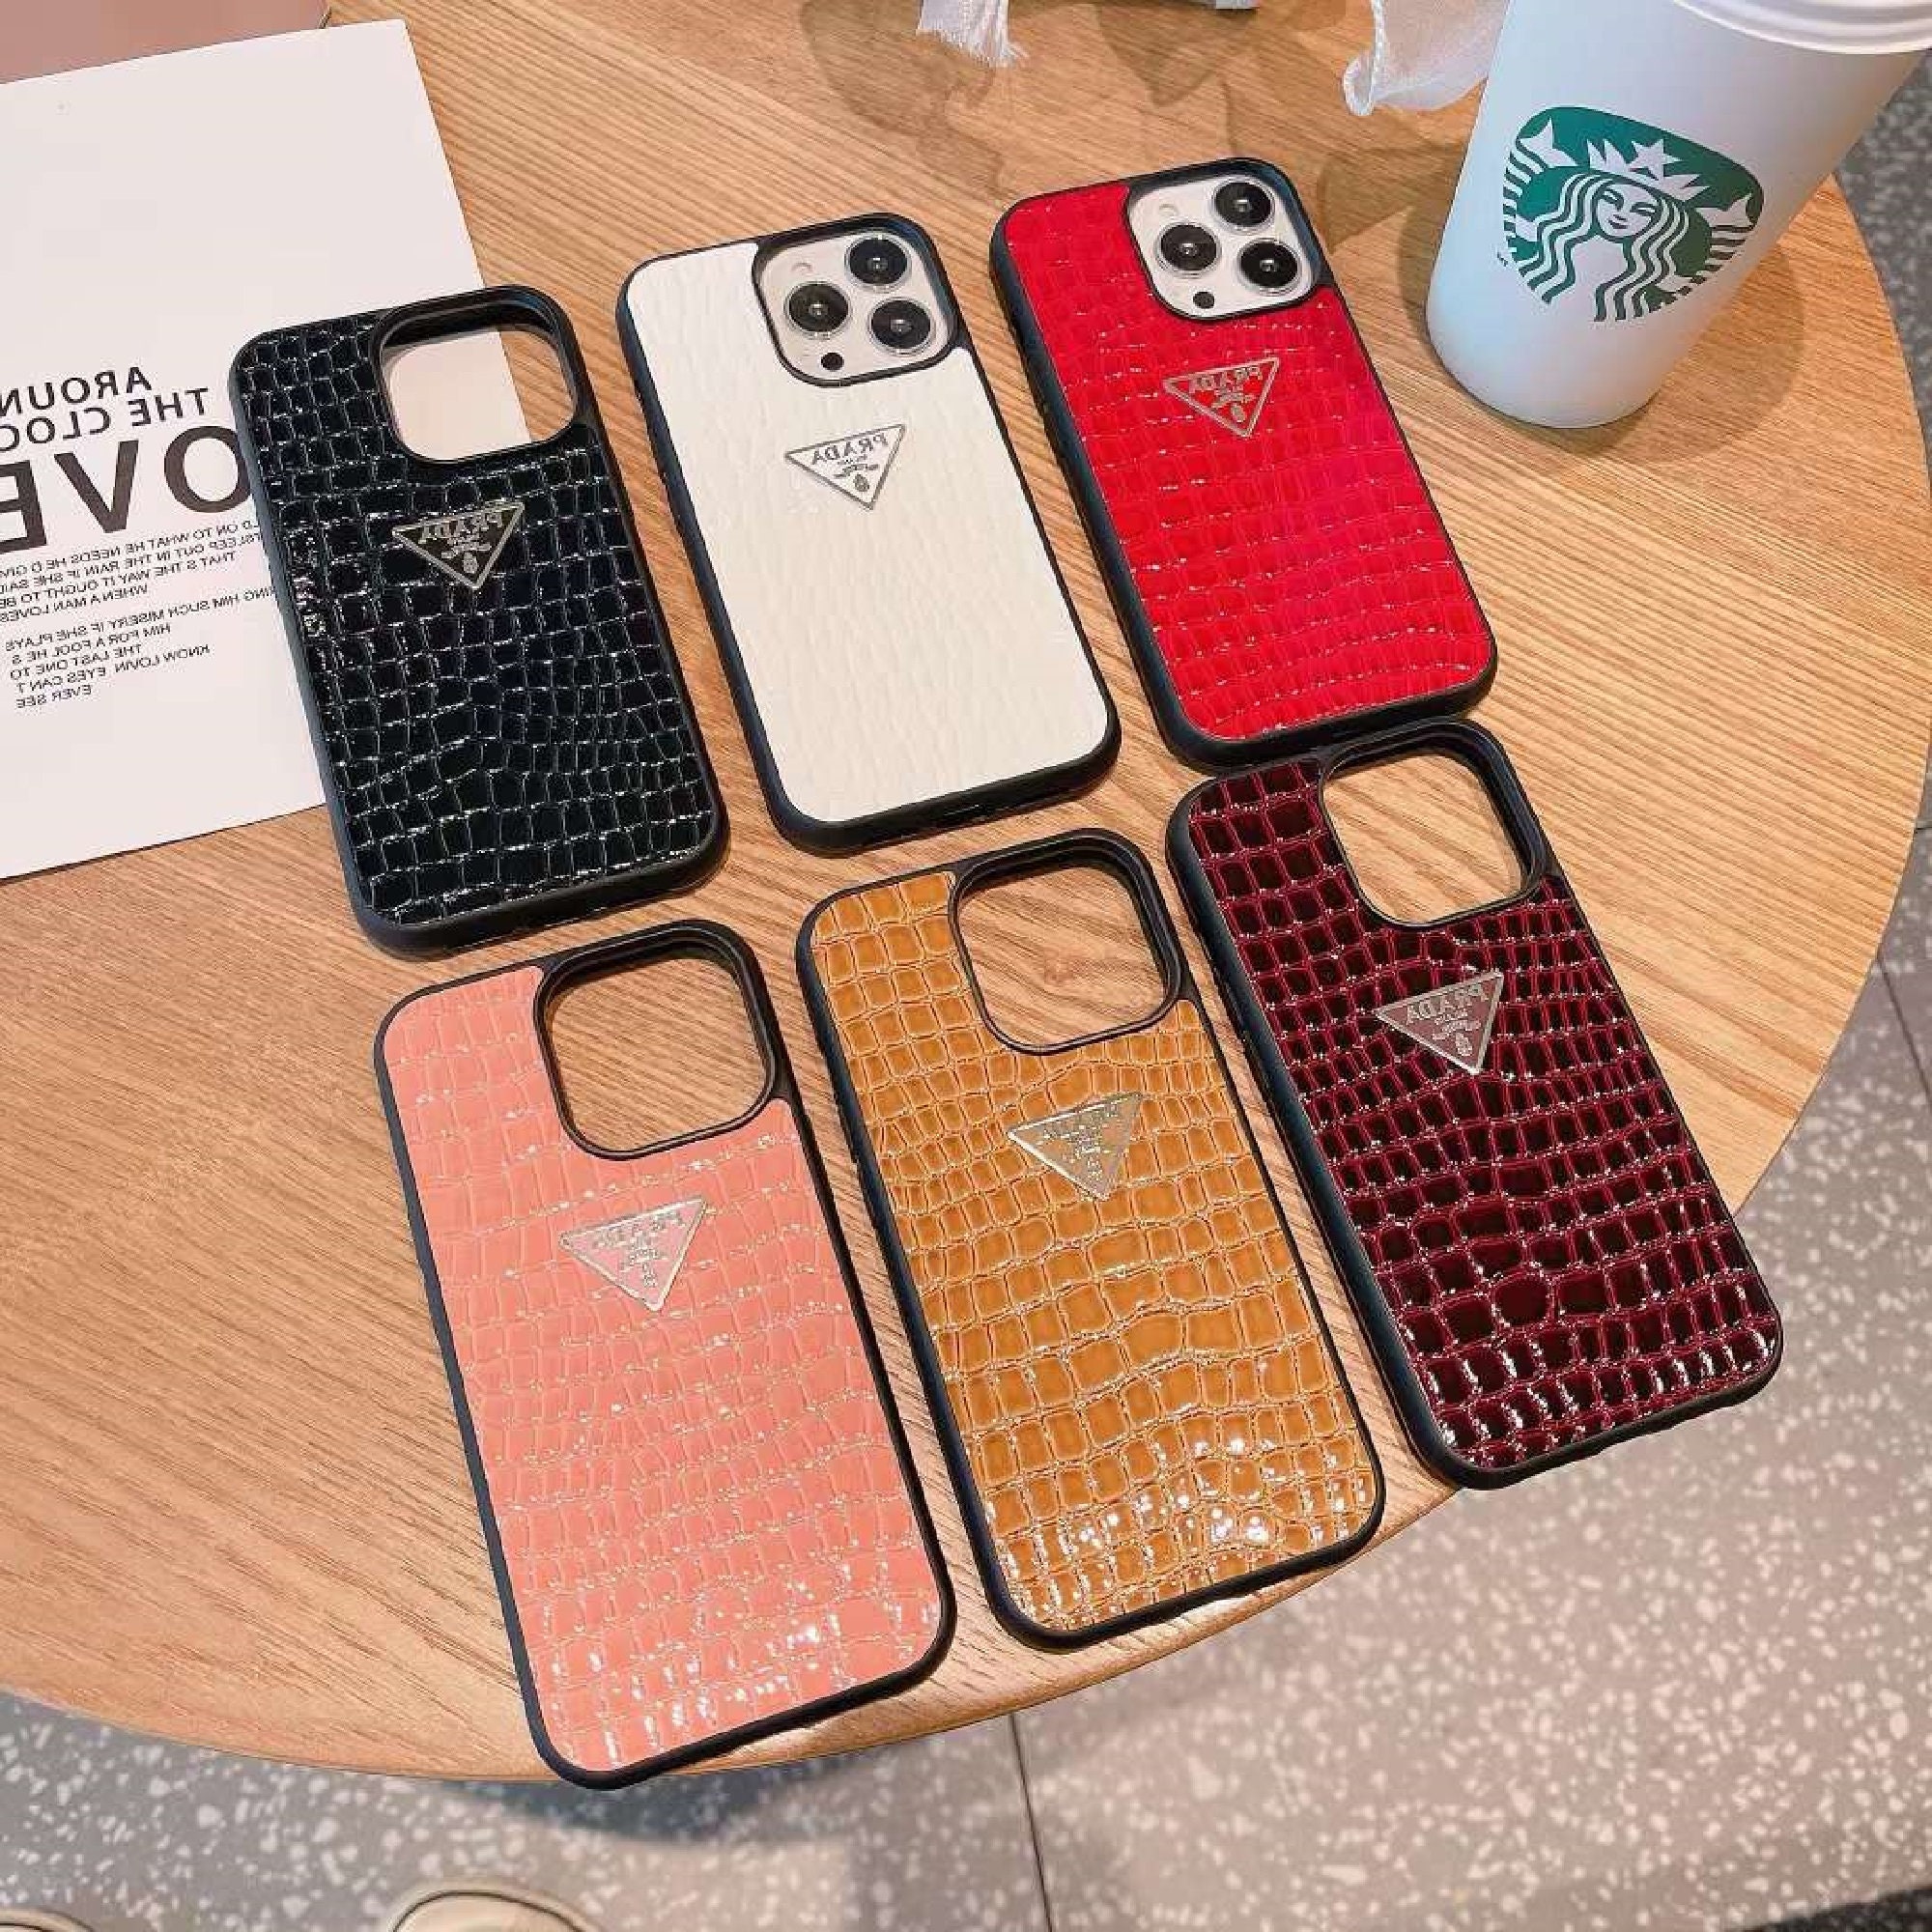 LOUIS VUITTON LV LOGO PATTERN RED RIBBON iPhone XR Case Cover